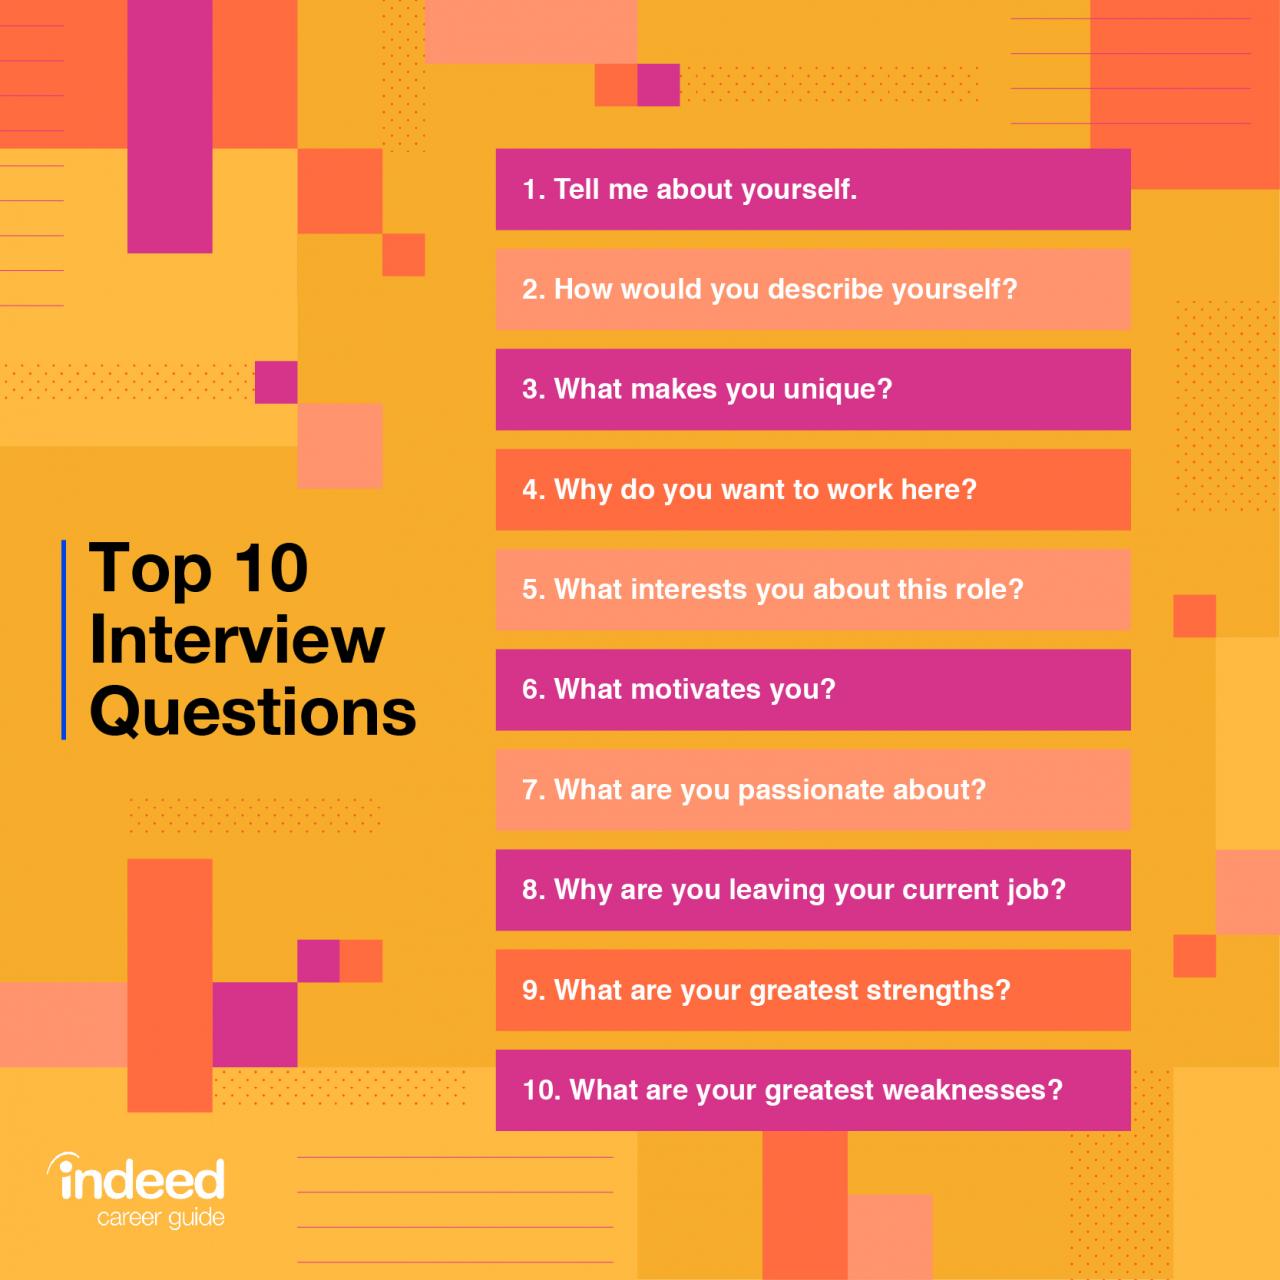 10 most common questions asked at an interview